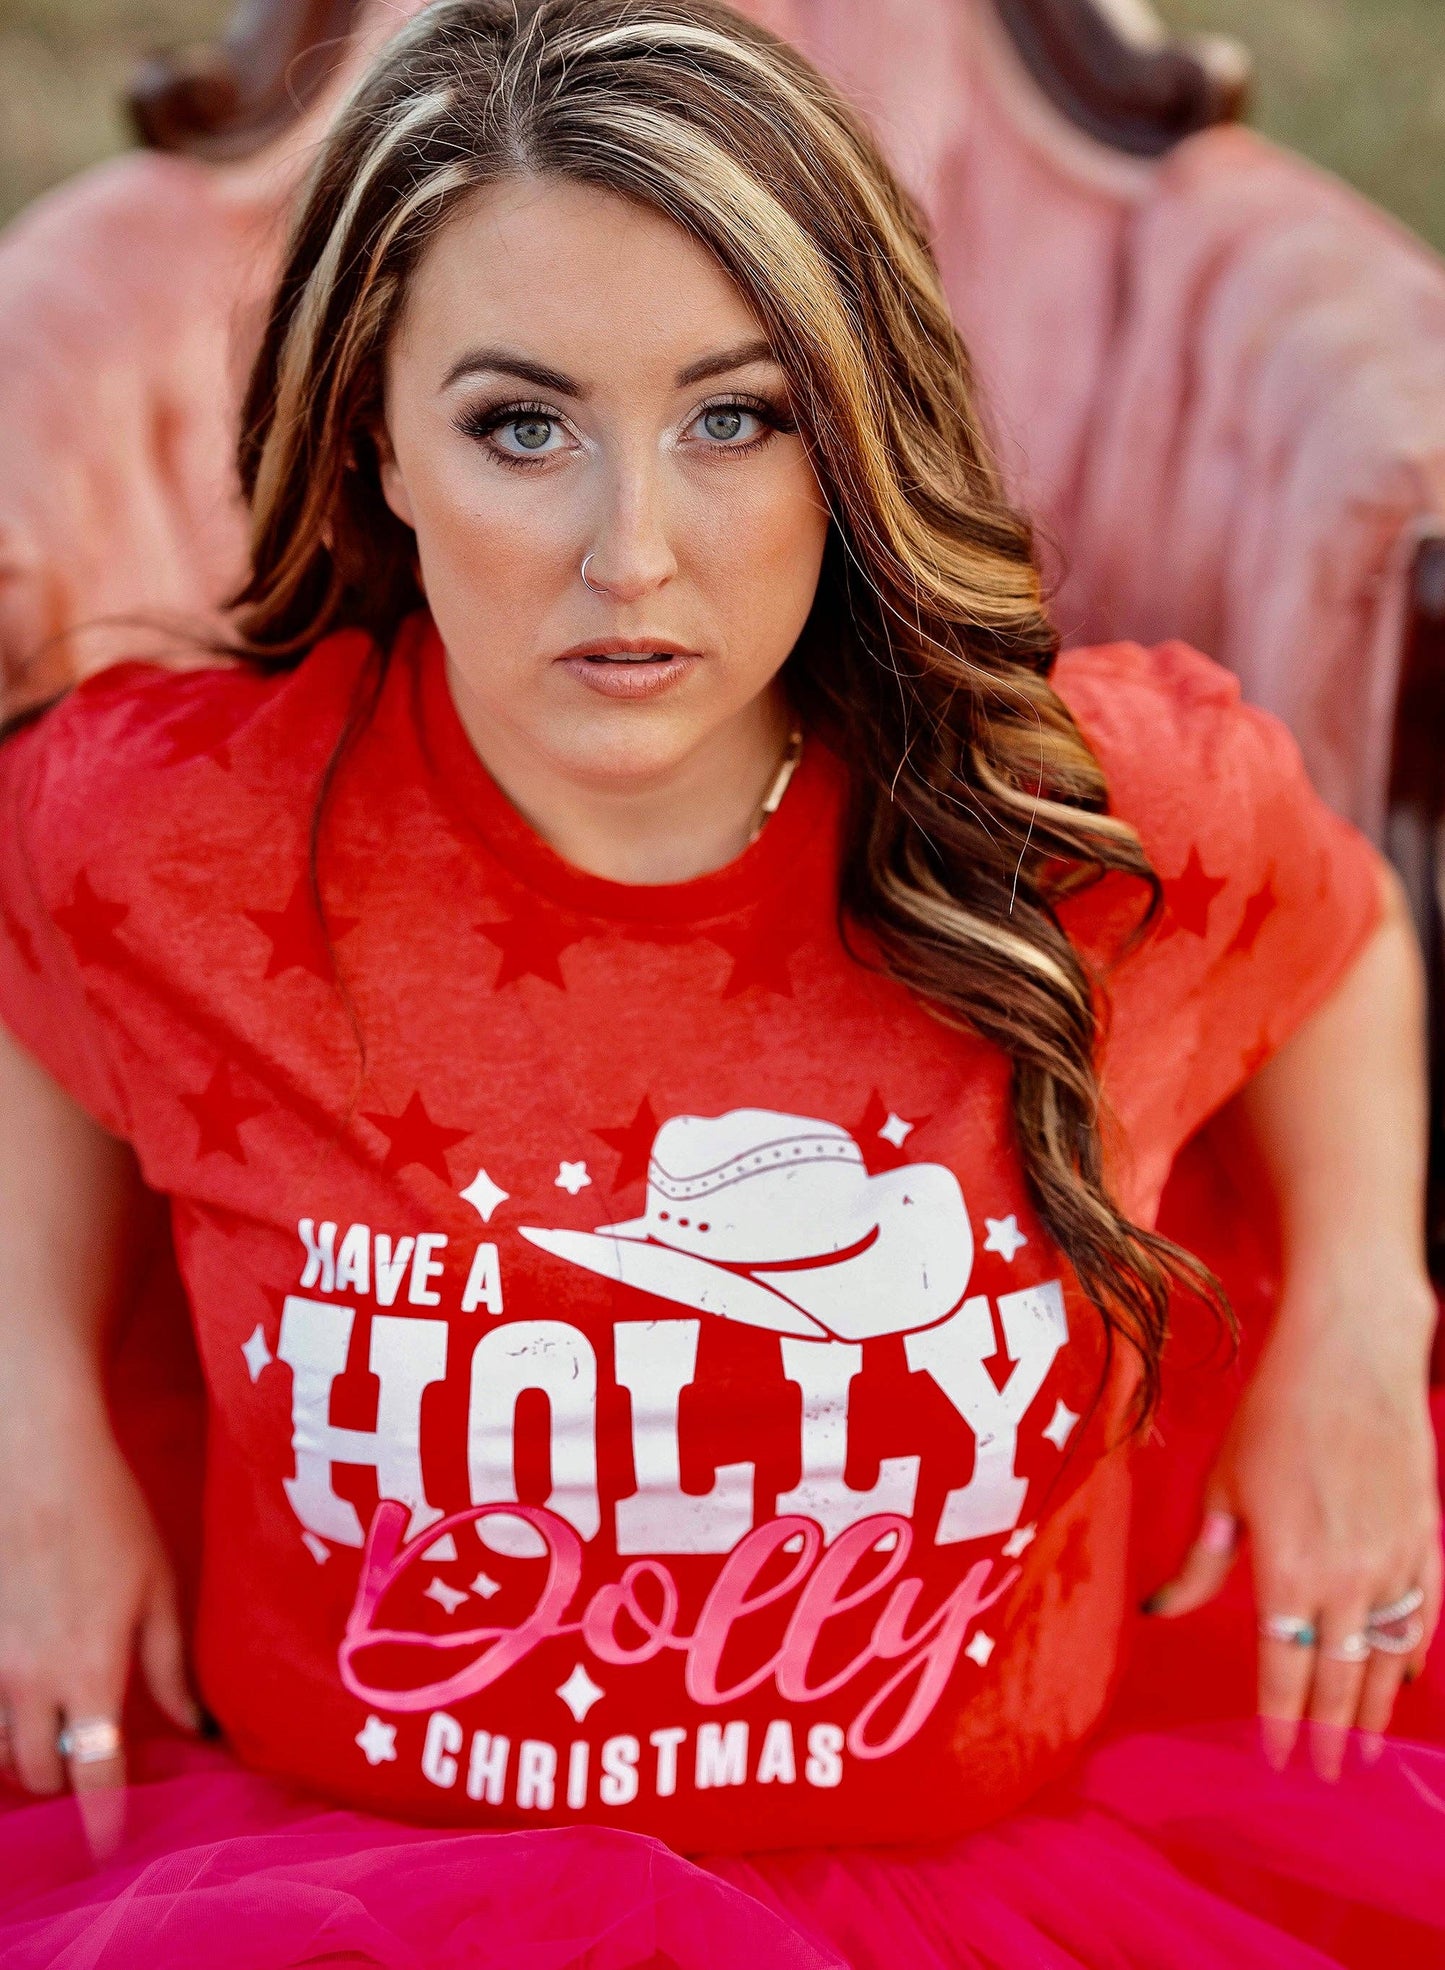 The Have A Holly Dolly Christmas Tee